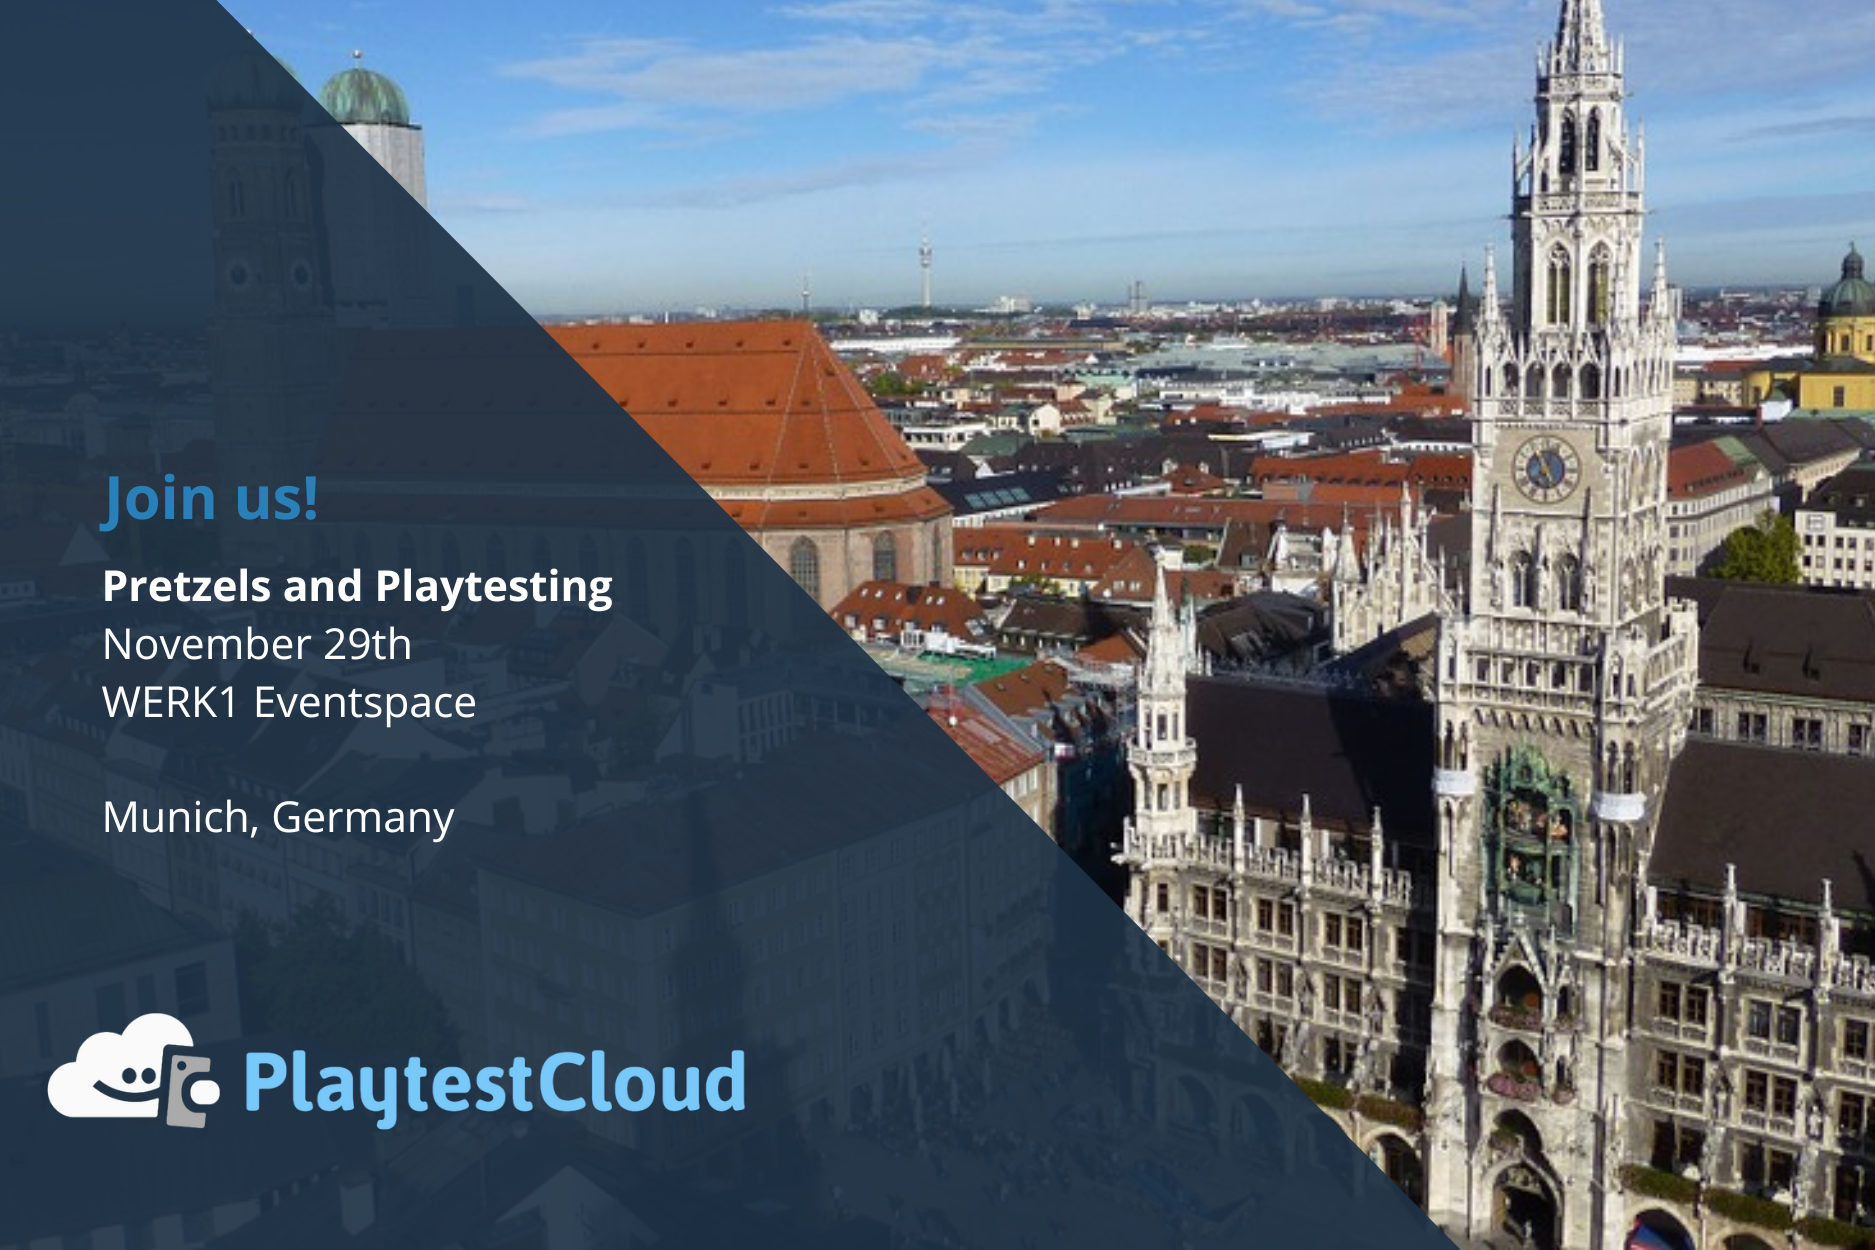 Meet us in Munich at Pretzels and Playtesting!